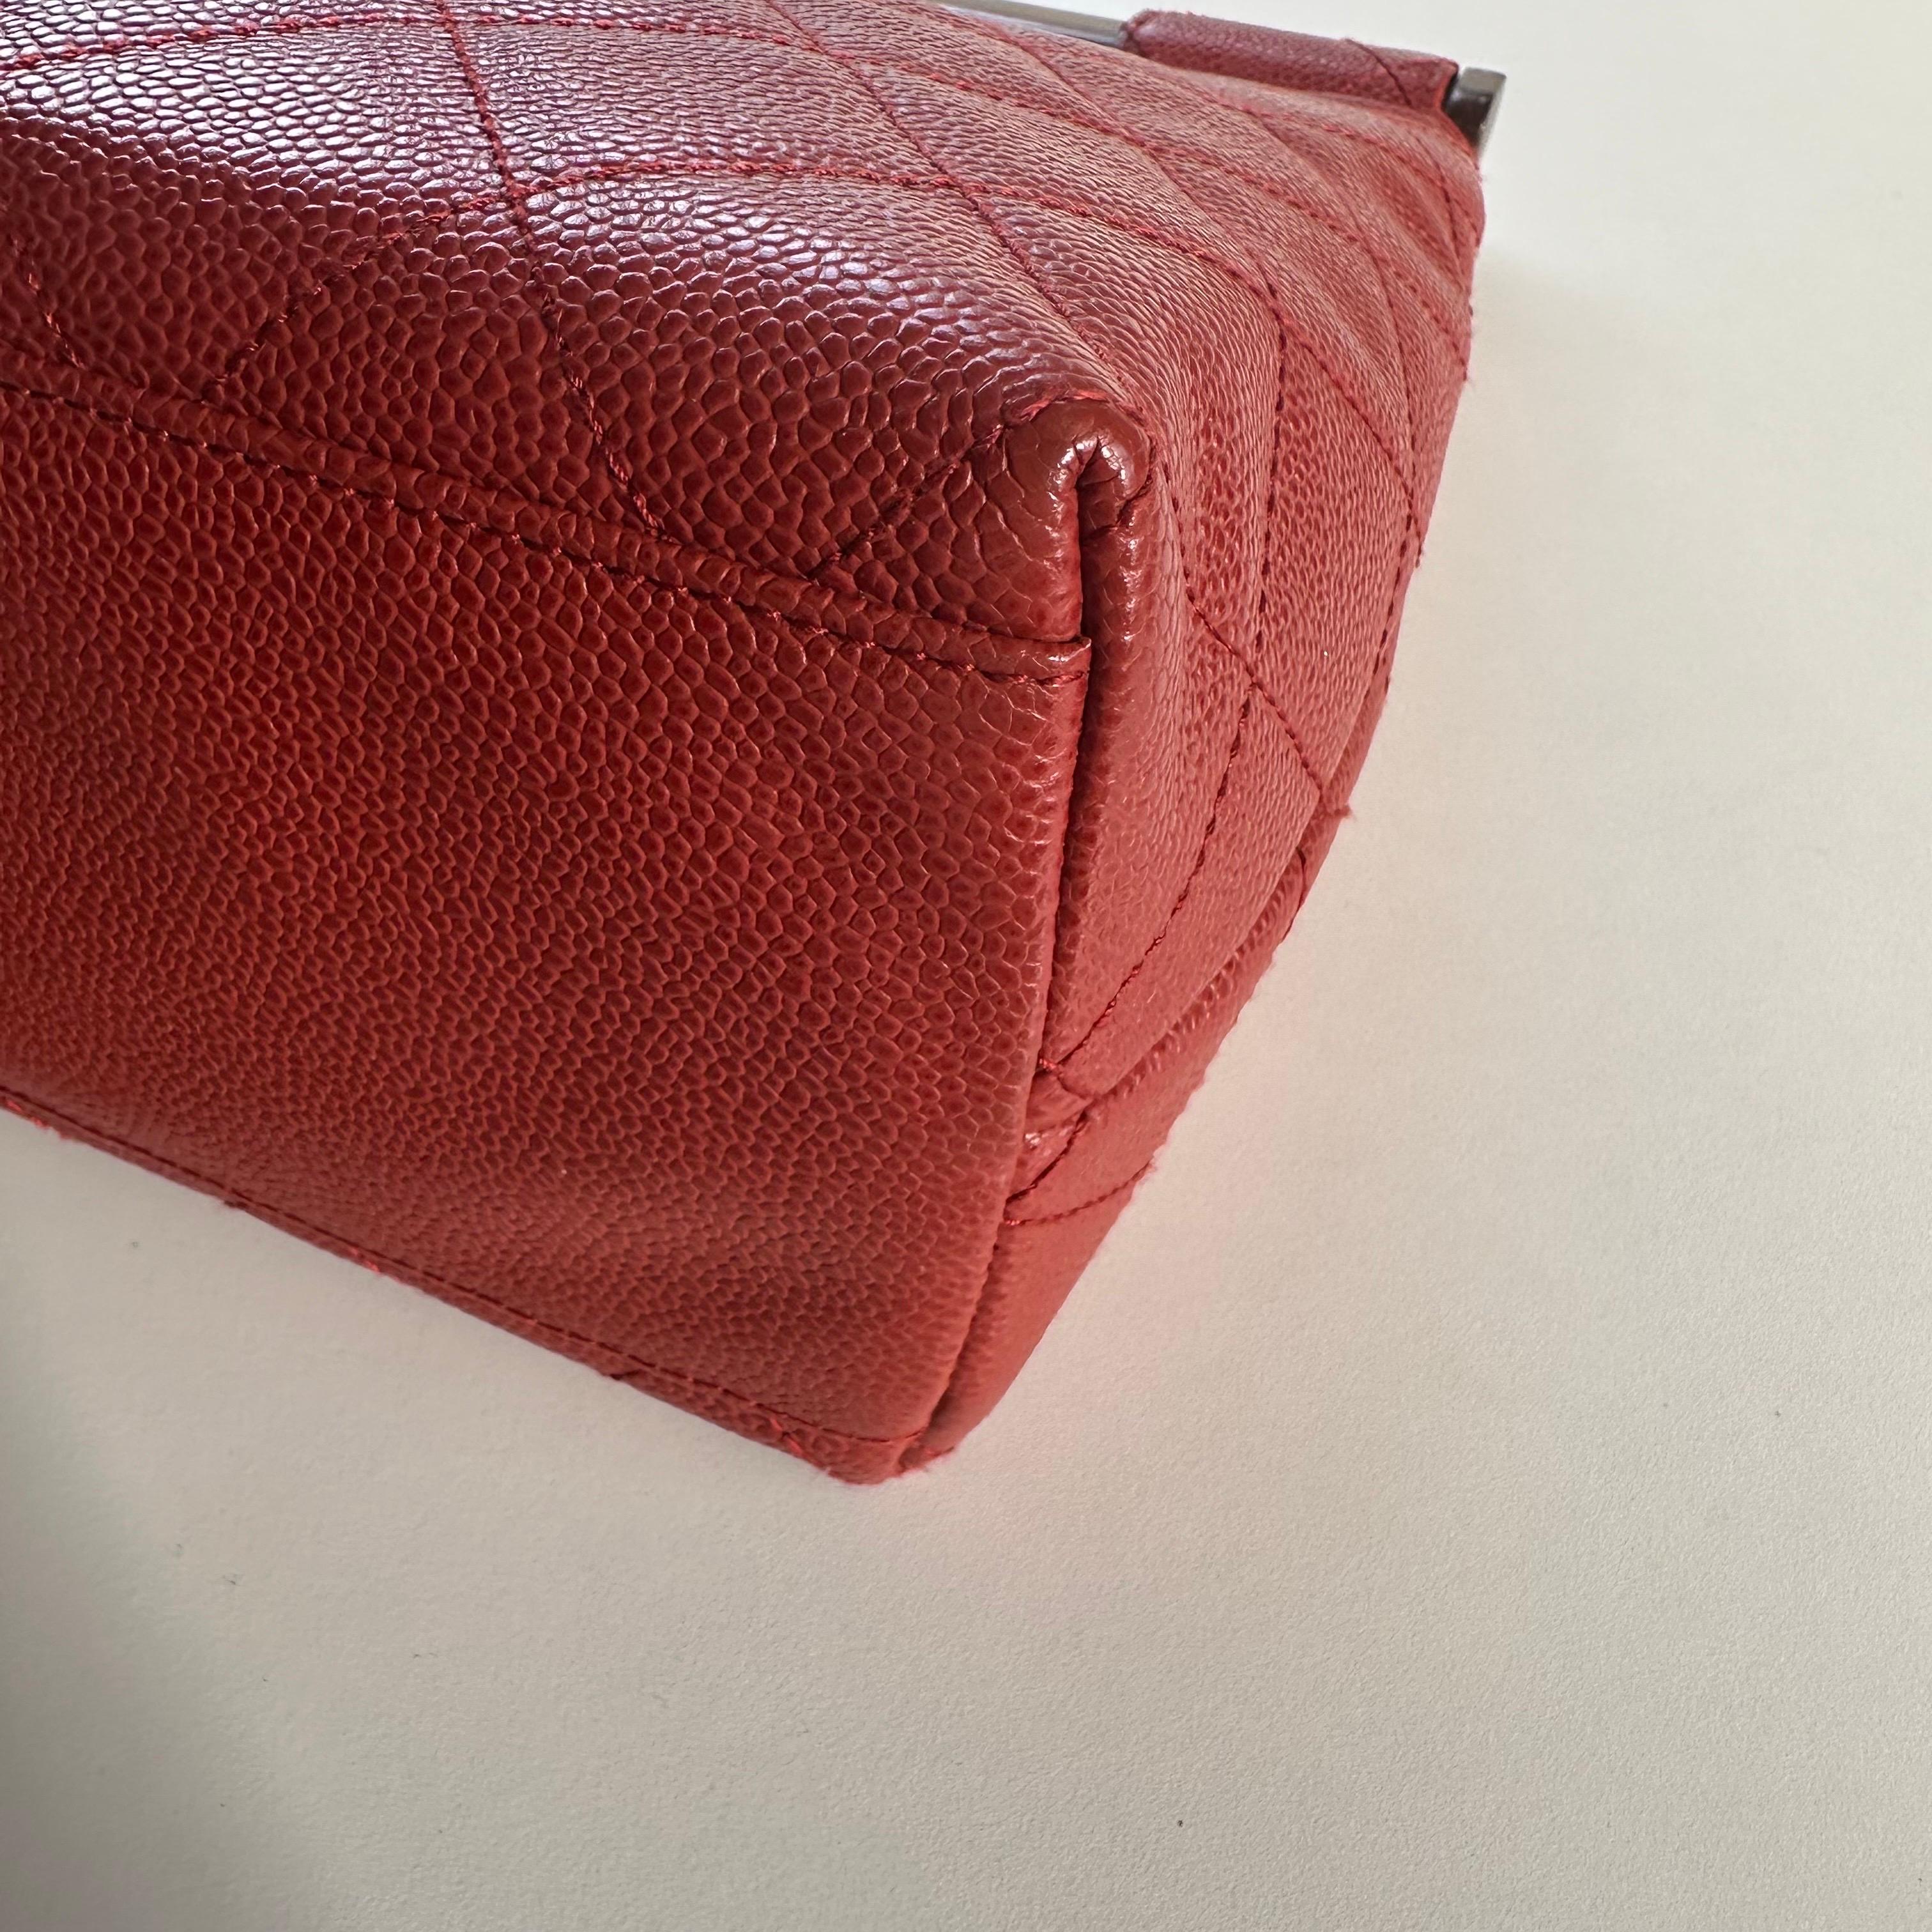 Chanel 2003 Wood Top Handle Rare Red Caviar Jumbo Kelly Envelope Clutch Tote Bag For Sale 10